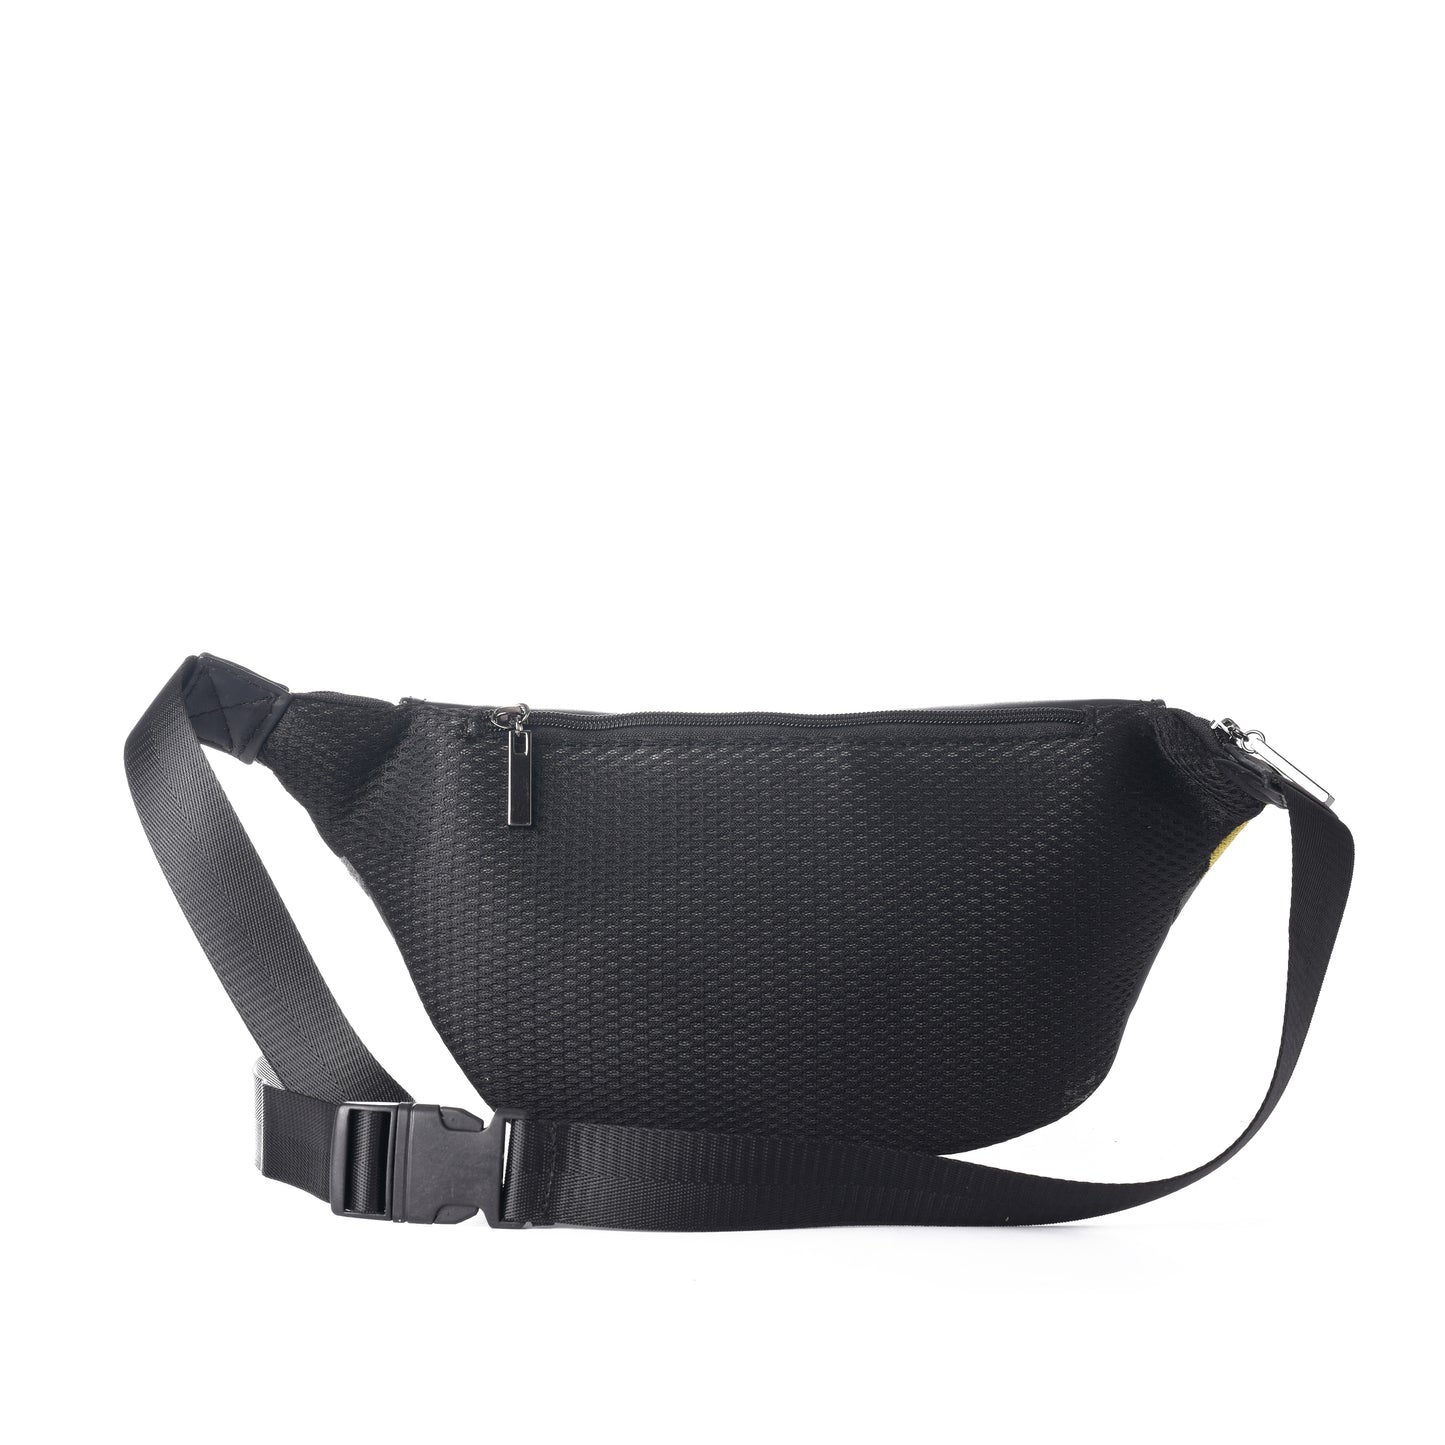 Fanny pack - Black with Yellow Army pattern